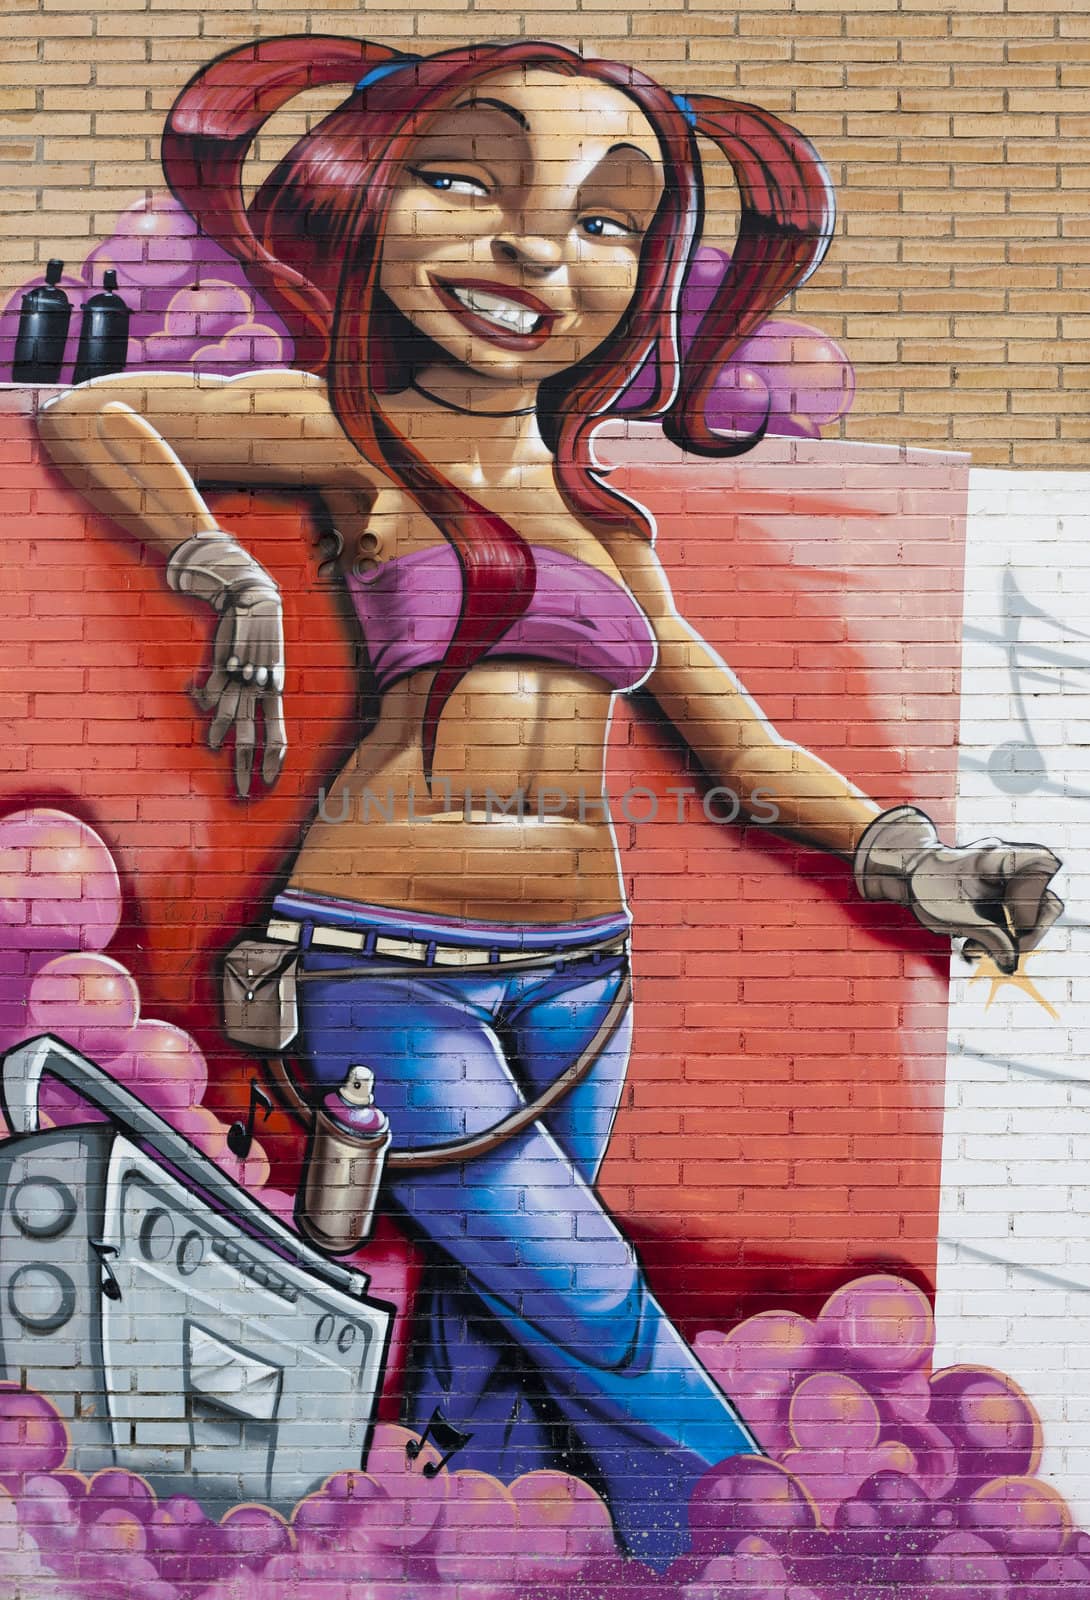 Graffiti of teenage girl listening to music and snapping her fingers while taking a break from graffiti painting.